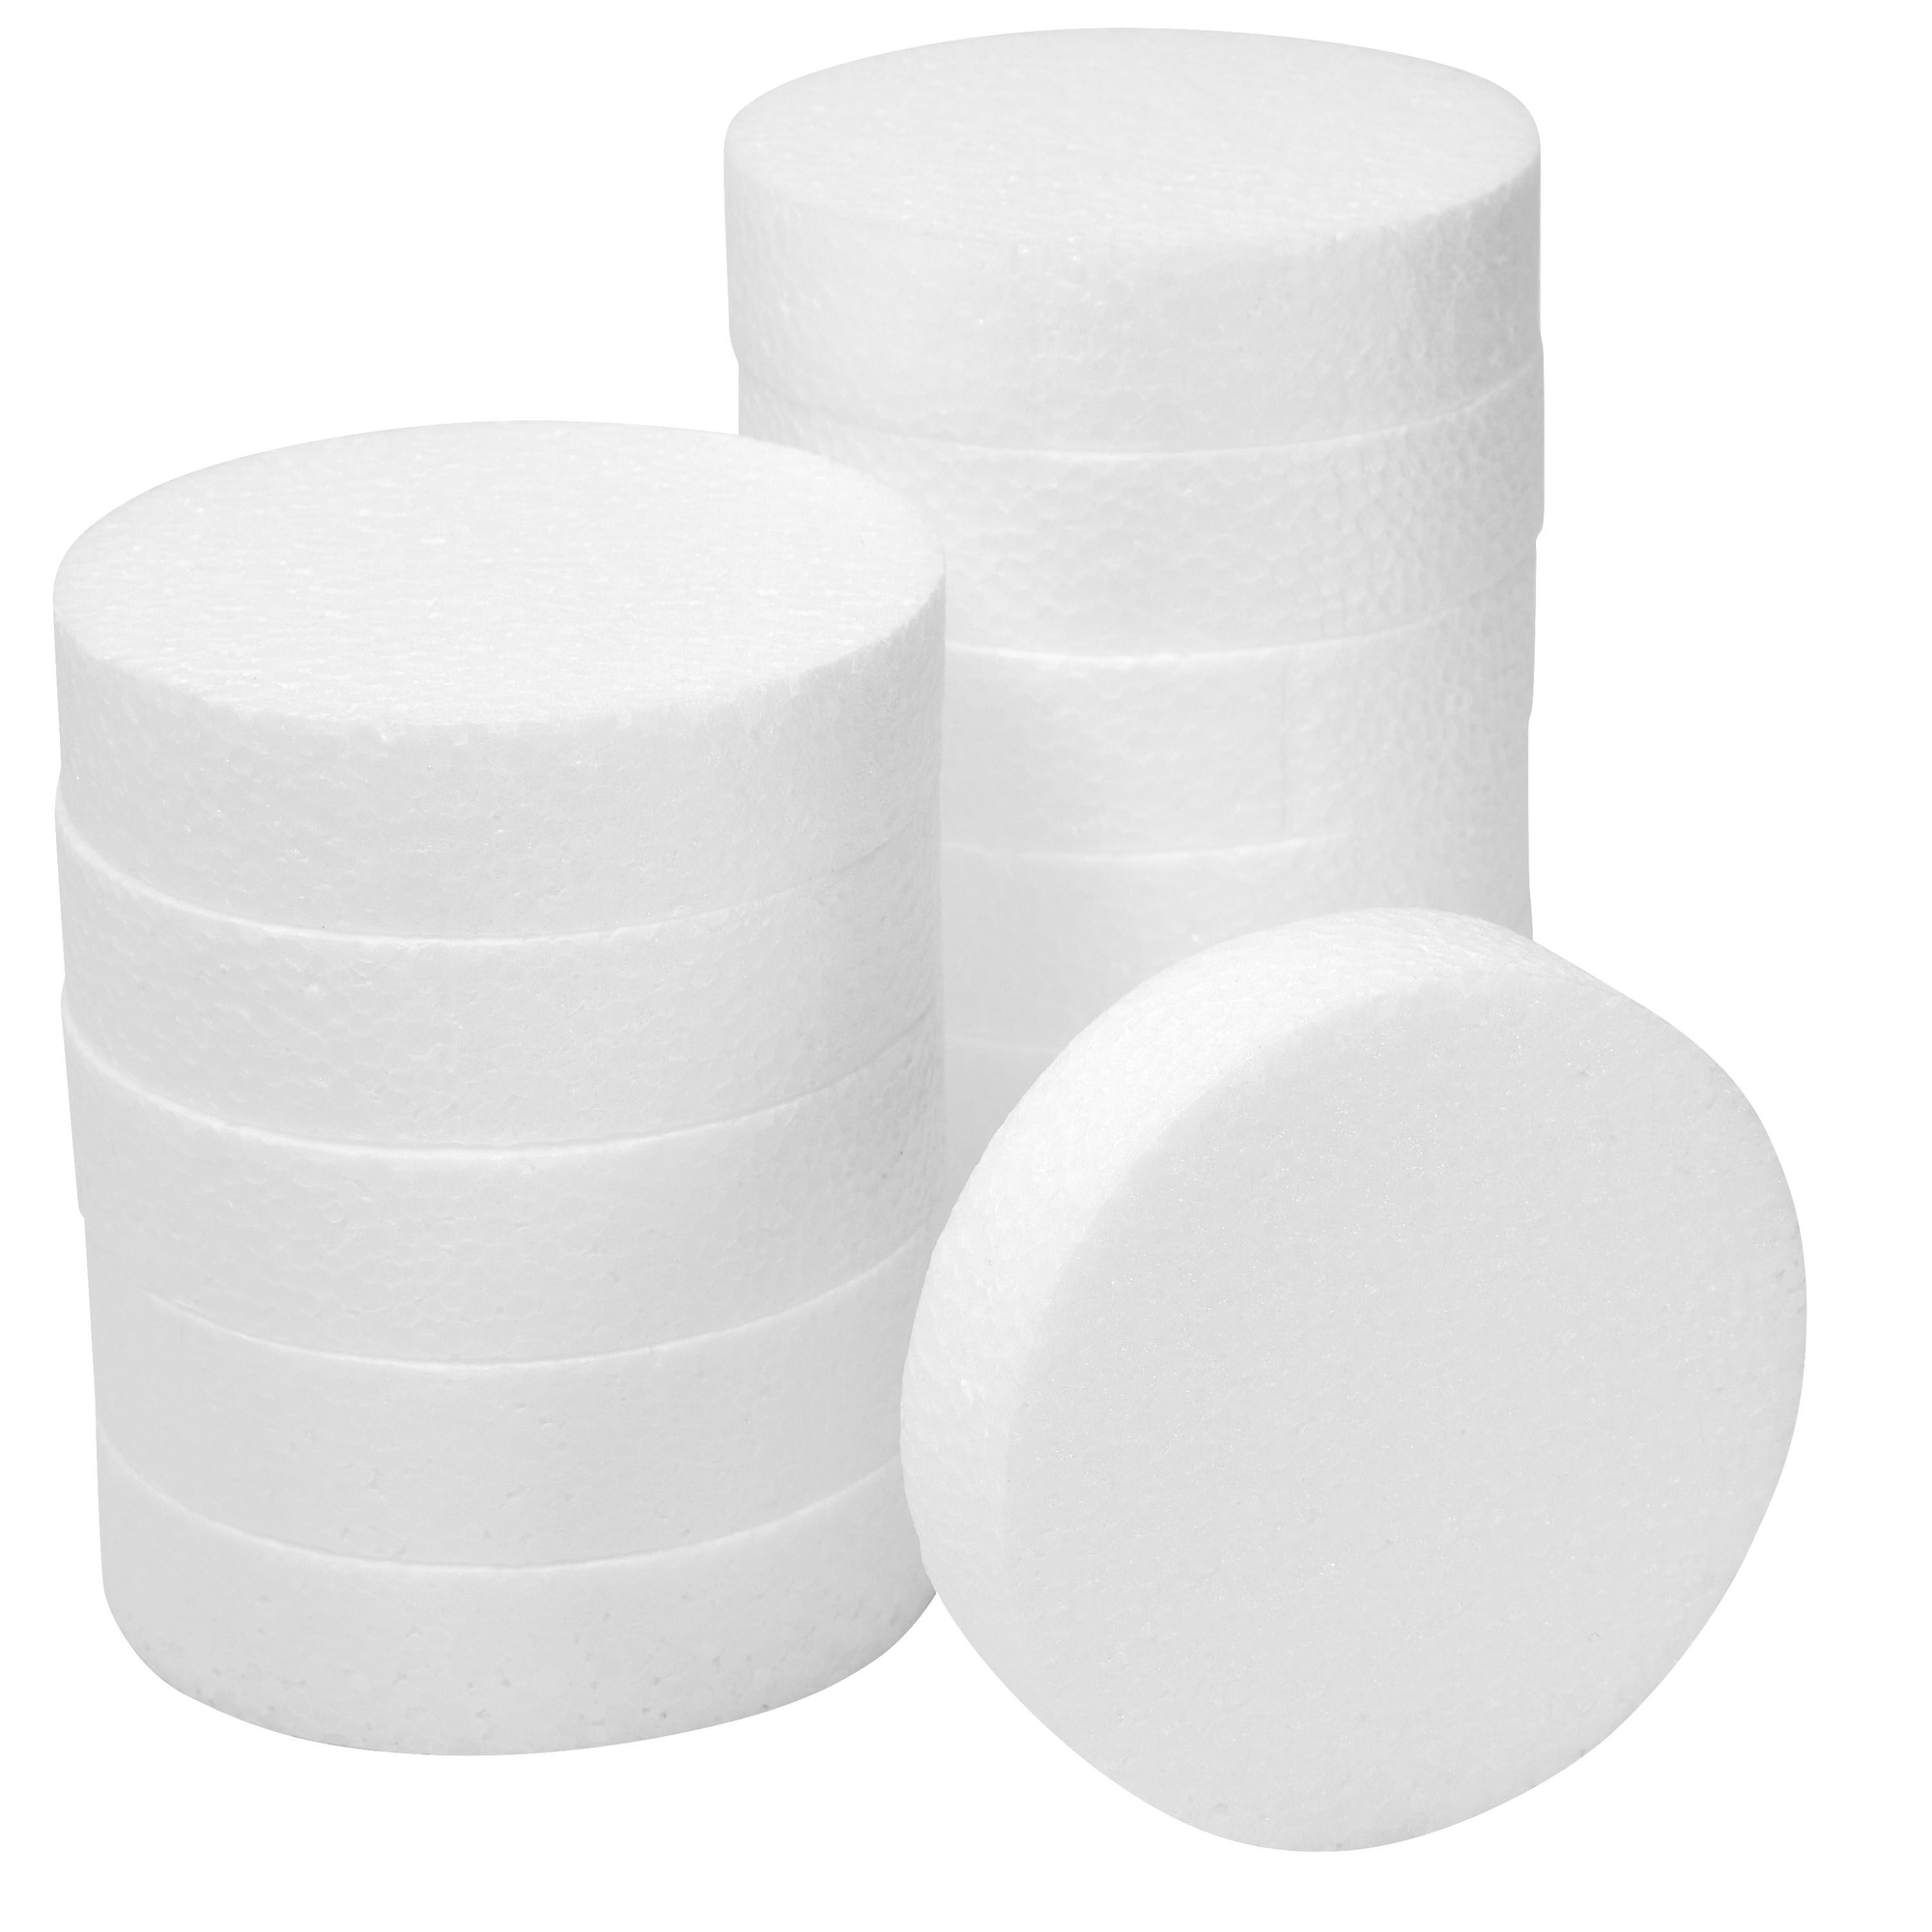 12 Pack Foam Circles for Crafts, Round Polystyrene Discs for DIY